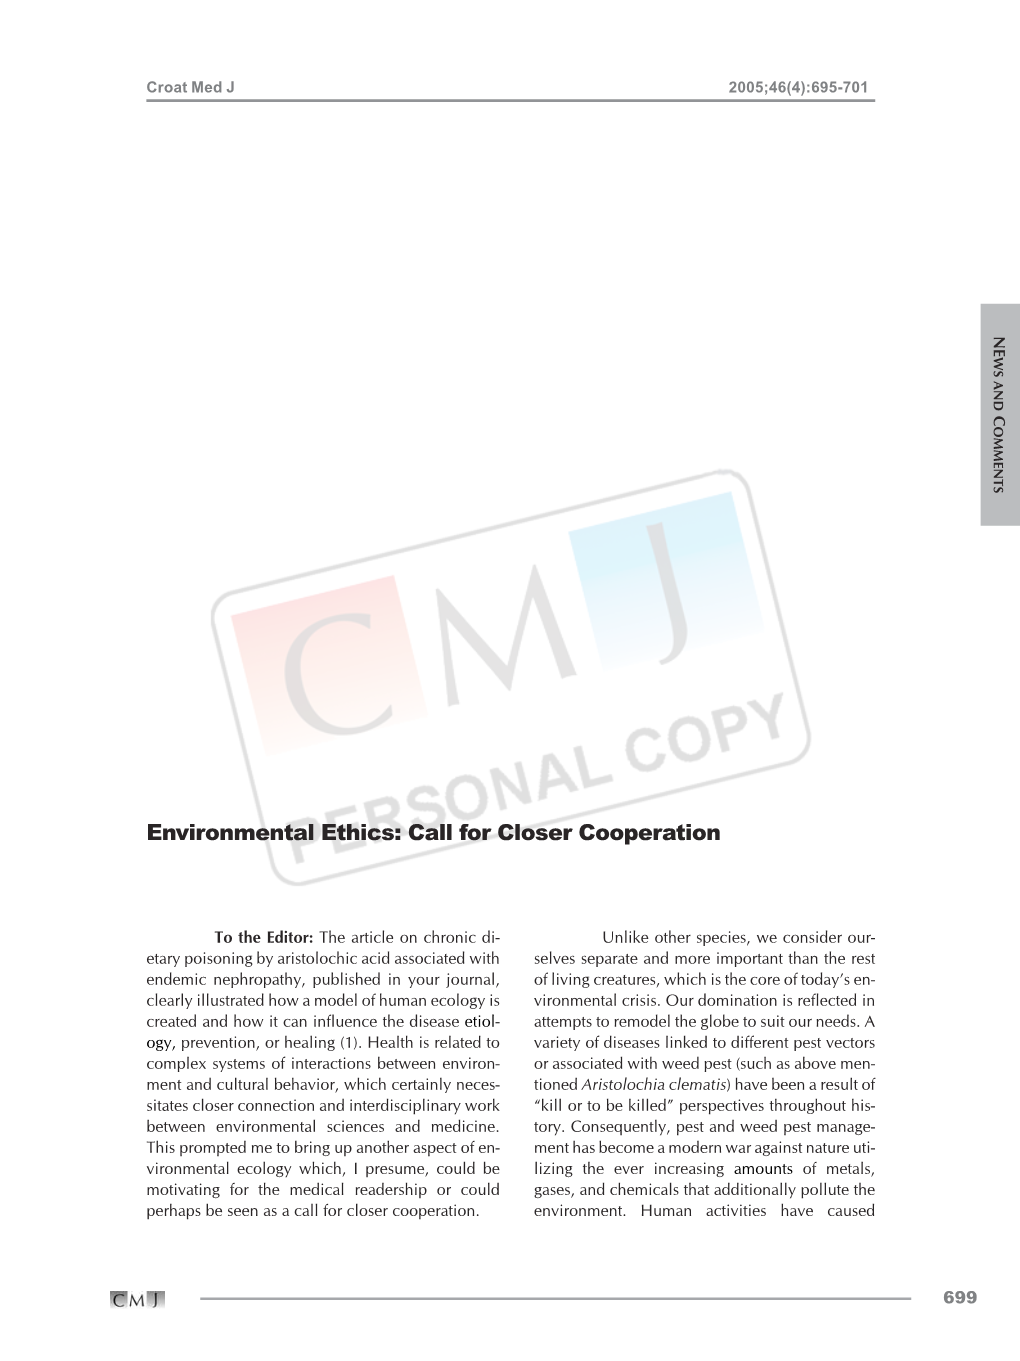 Environmental Ethics: Call for Closer Cooperation